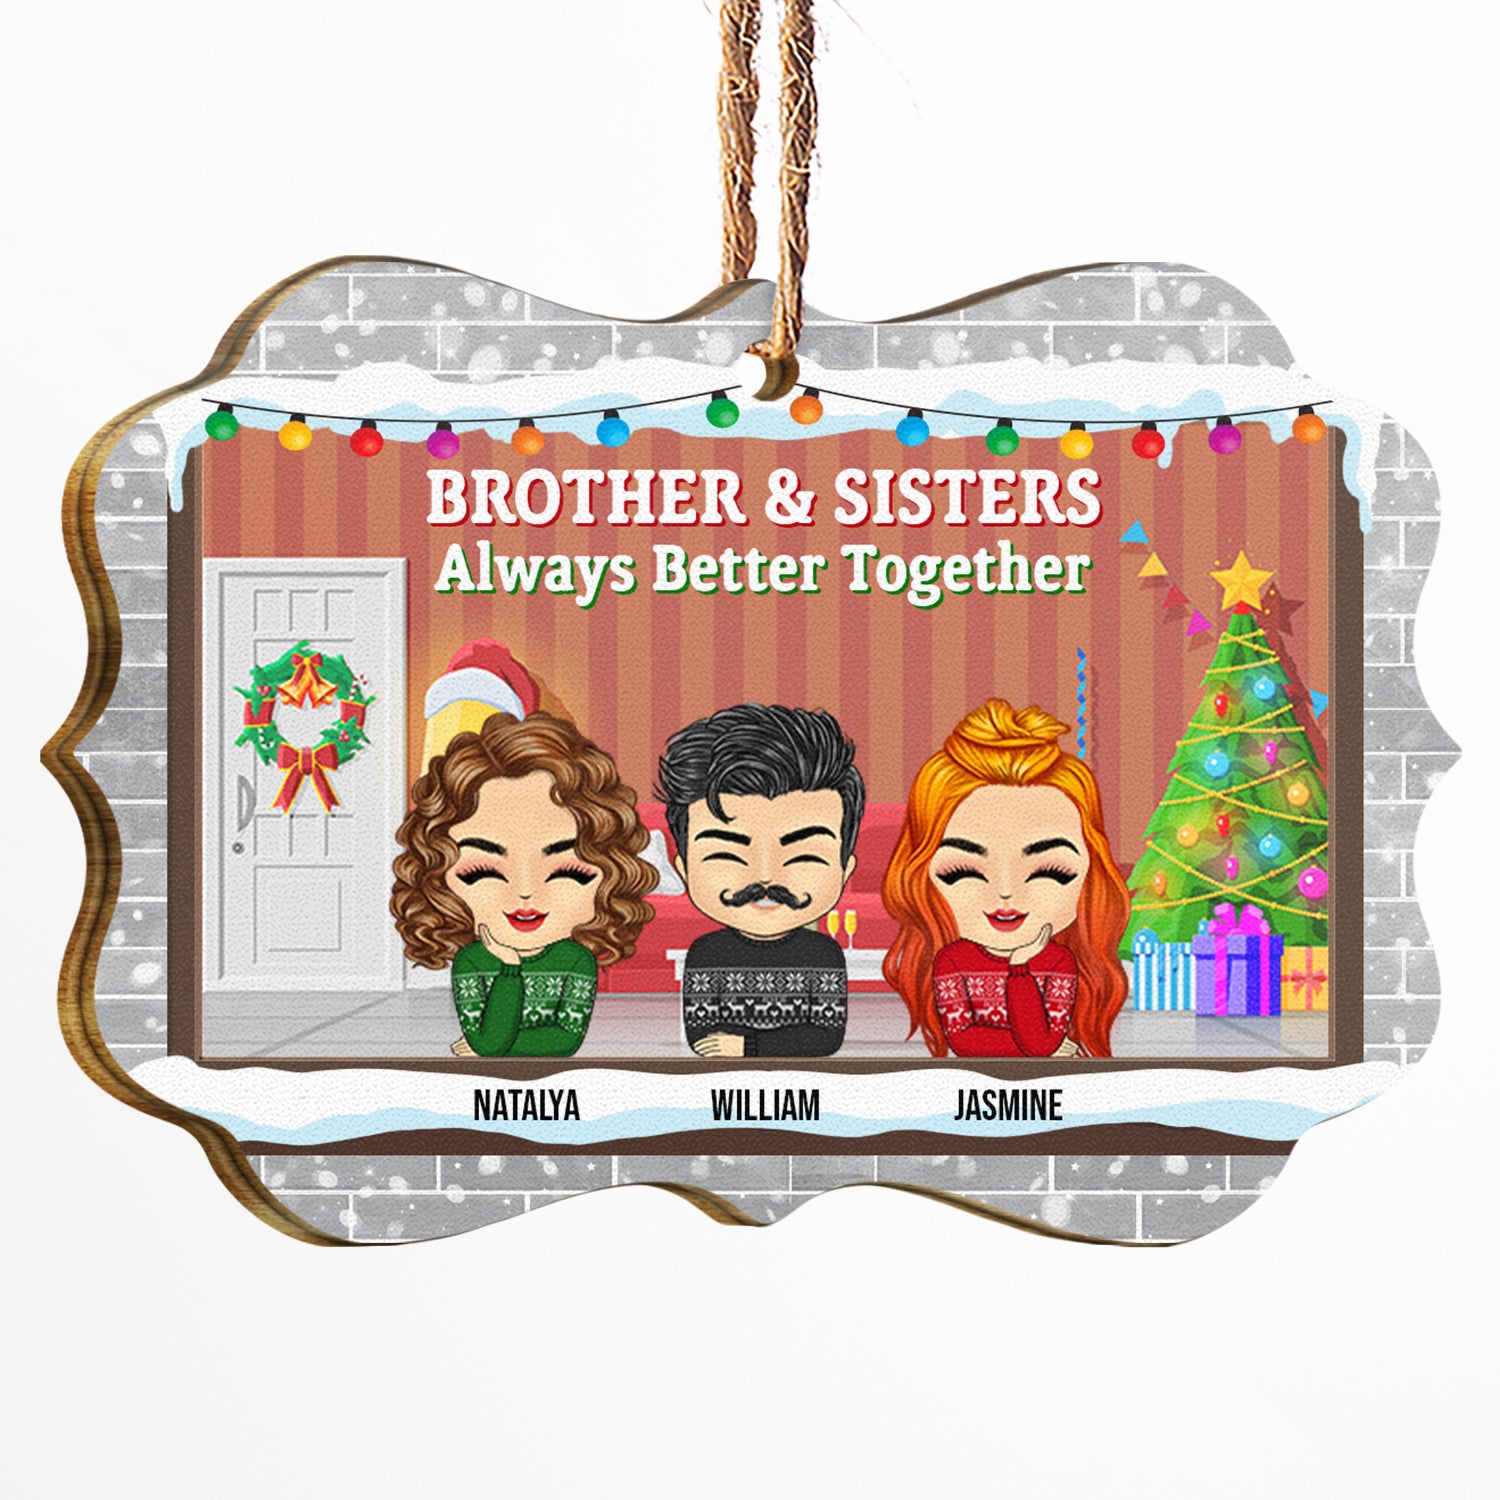 Sibling Brother Sisters Always Better Together - Christmas Gift For Besties & Siblings - Personalized Custom Wooden Ornament, Aluminum Ornament